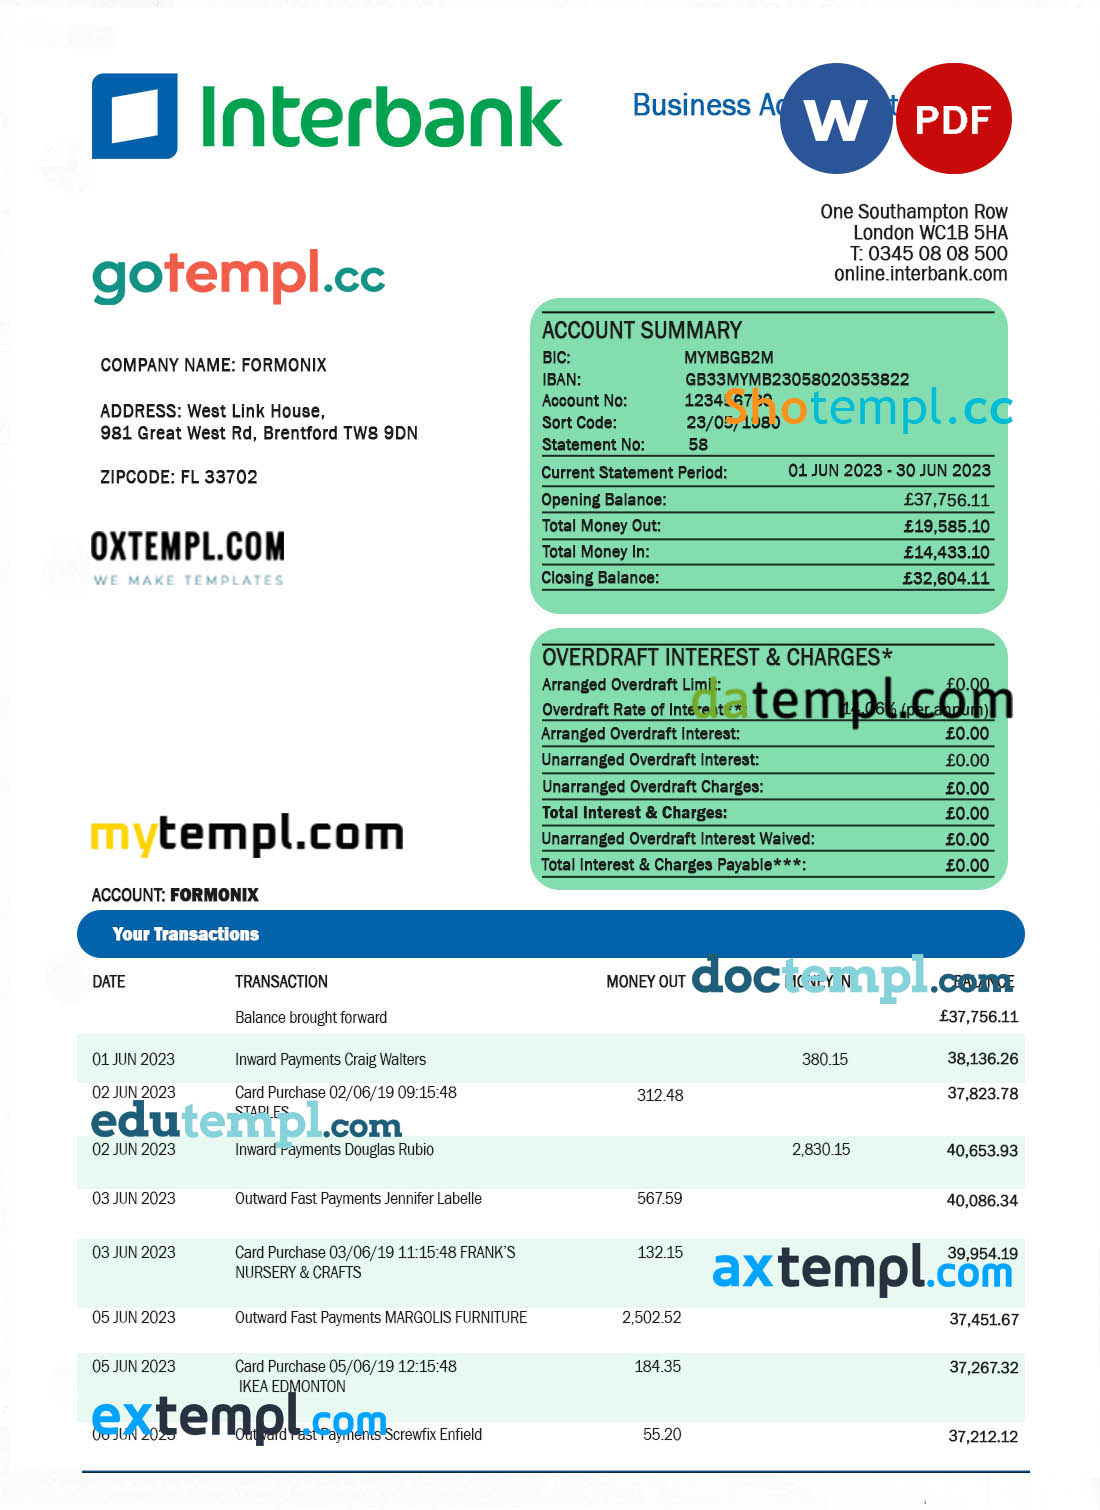 editable template, Interbank organization account statement Word and PDF template